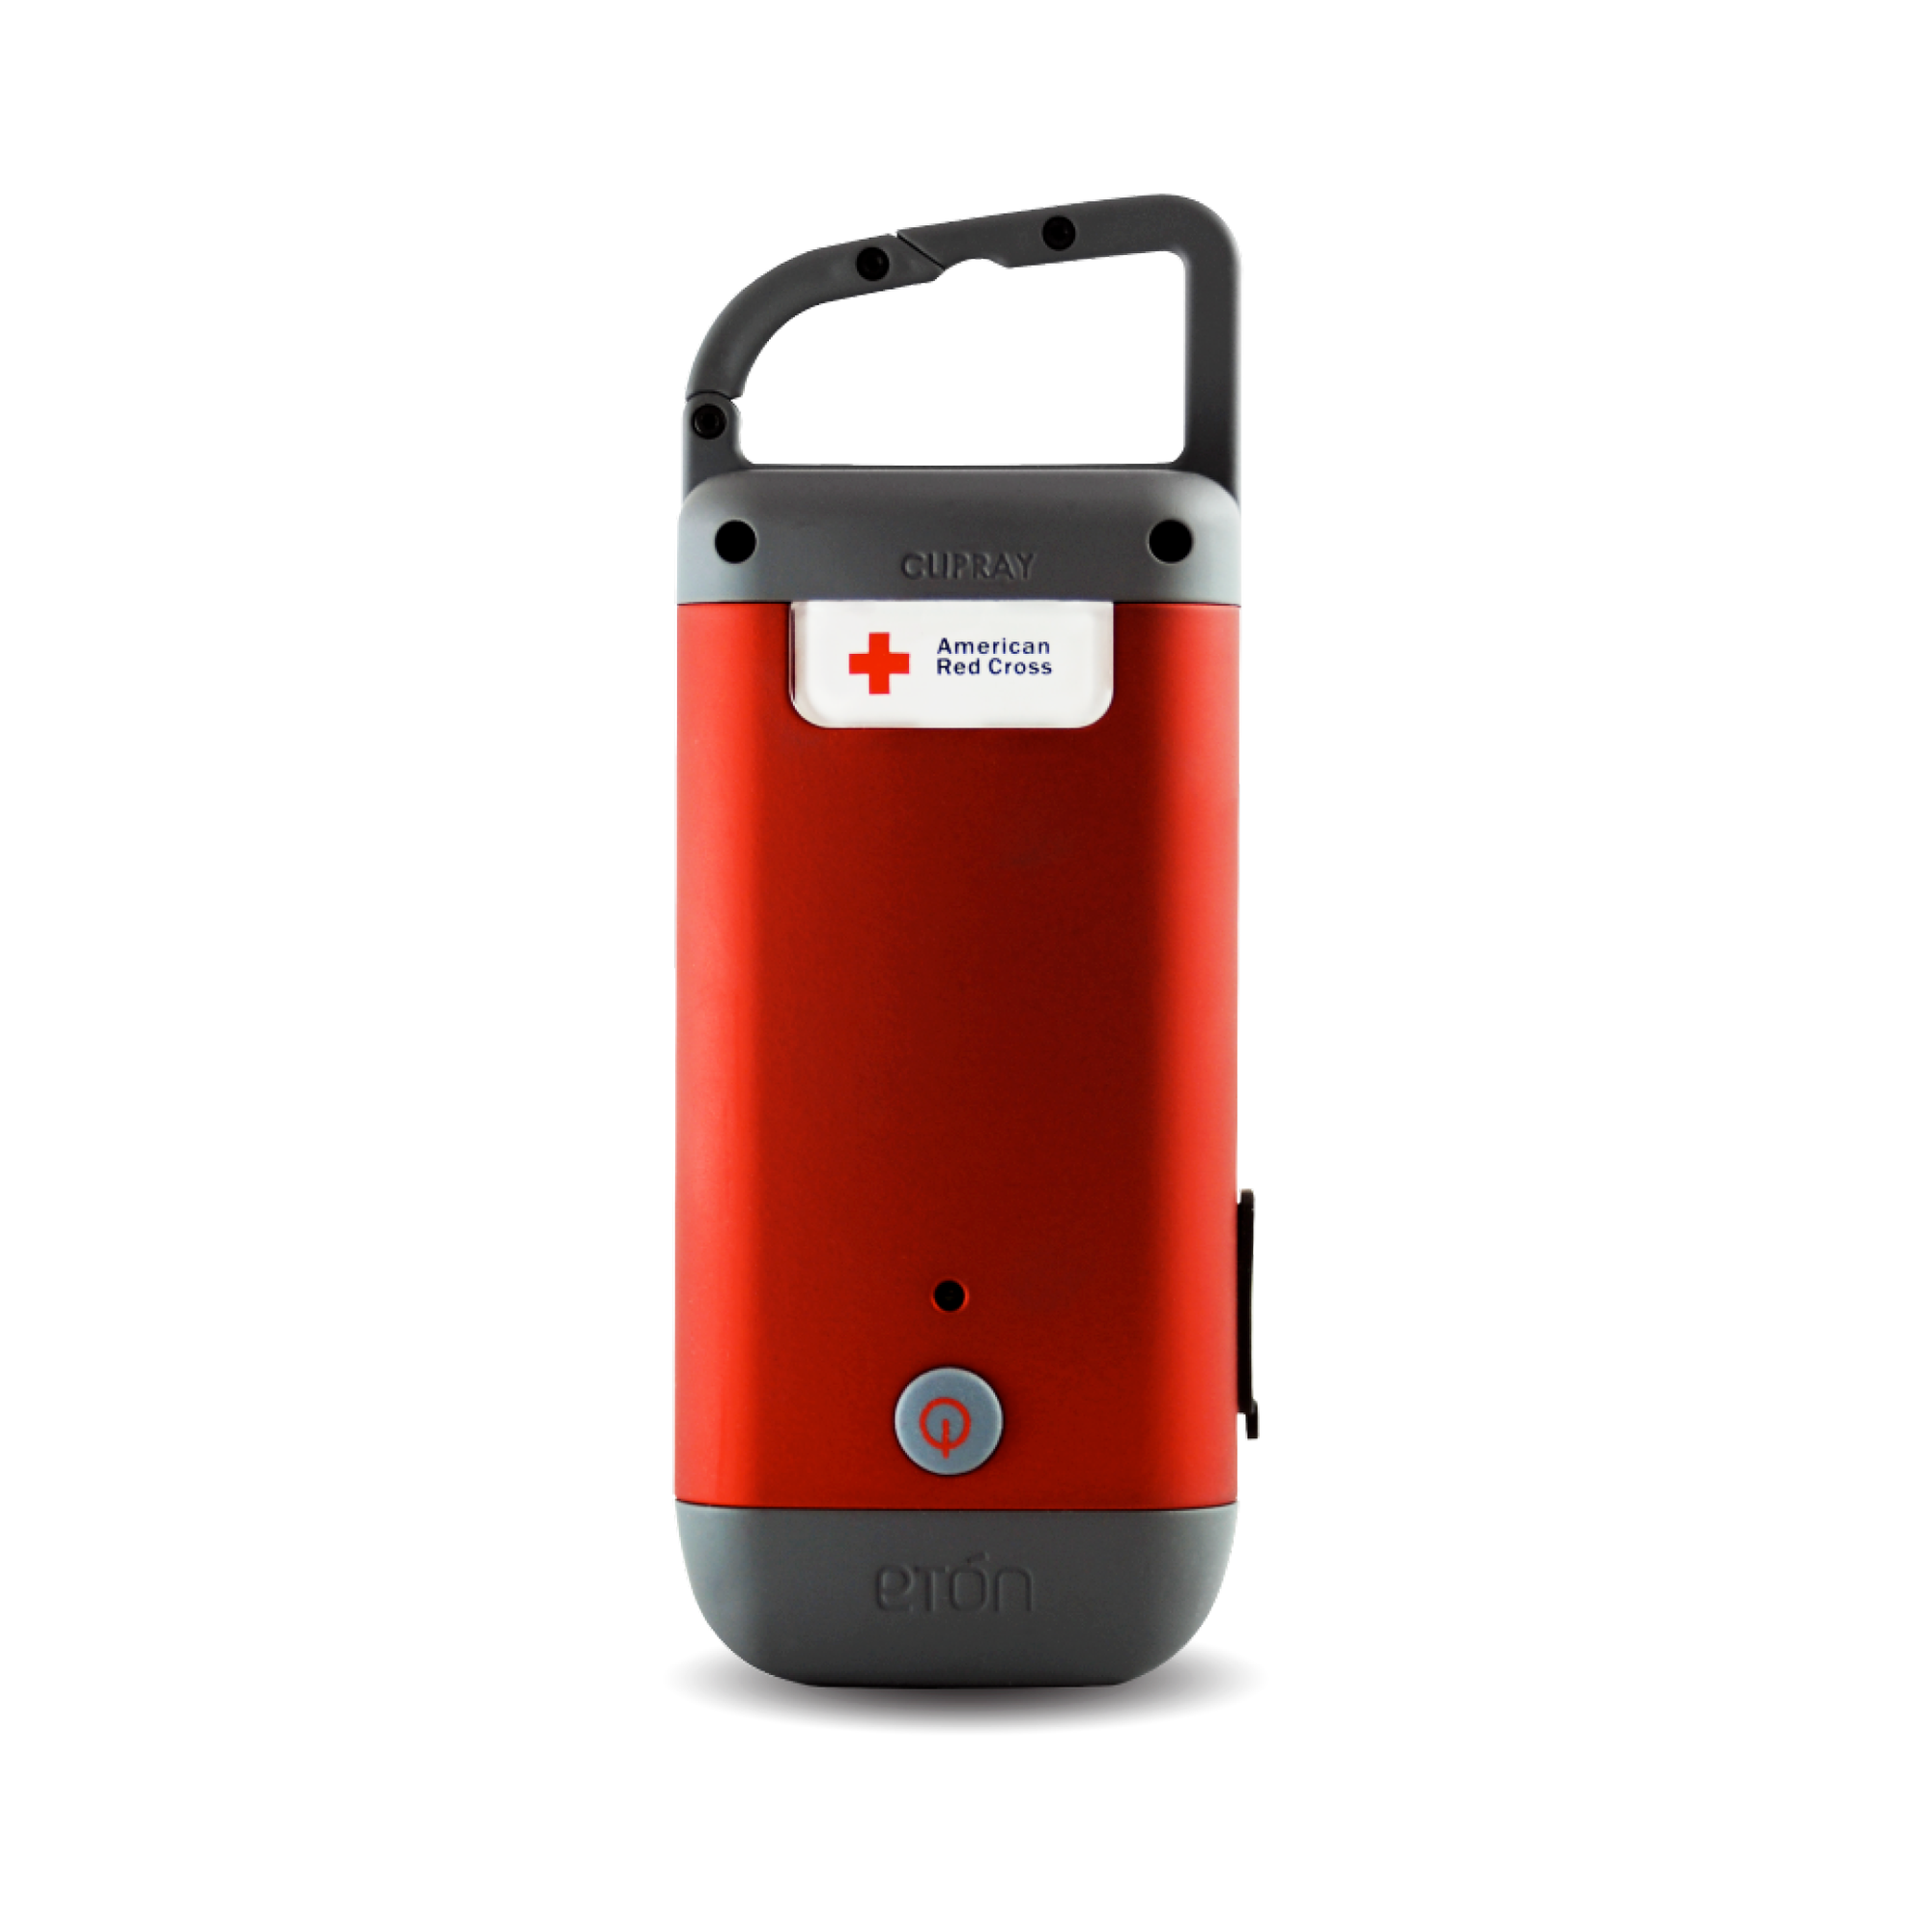 Eton- AMERICAN RED CROSS- Crank-Powered, Clip-on Flashlight with Phone Charger